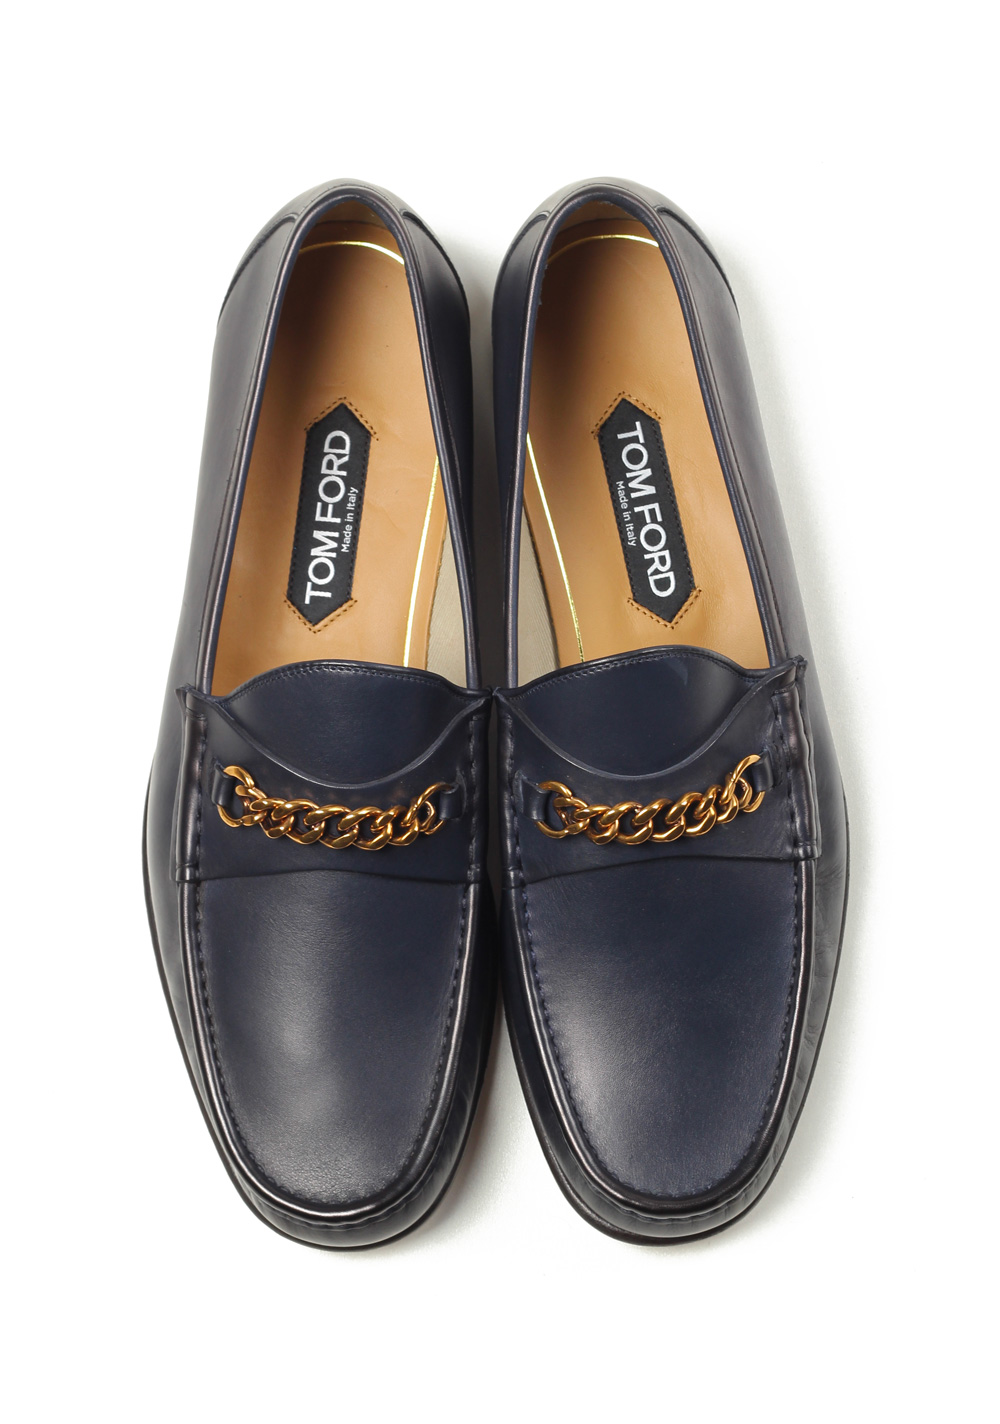 TOM FORD York Blue Leather Chain Loafers Shoes Size 7,5 UK / 8,5 U.S. | Costume Limité